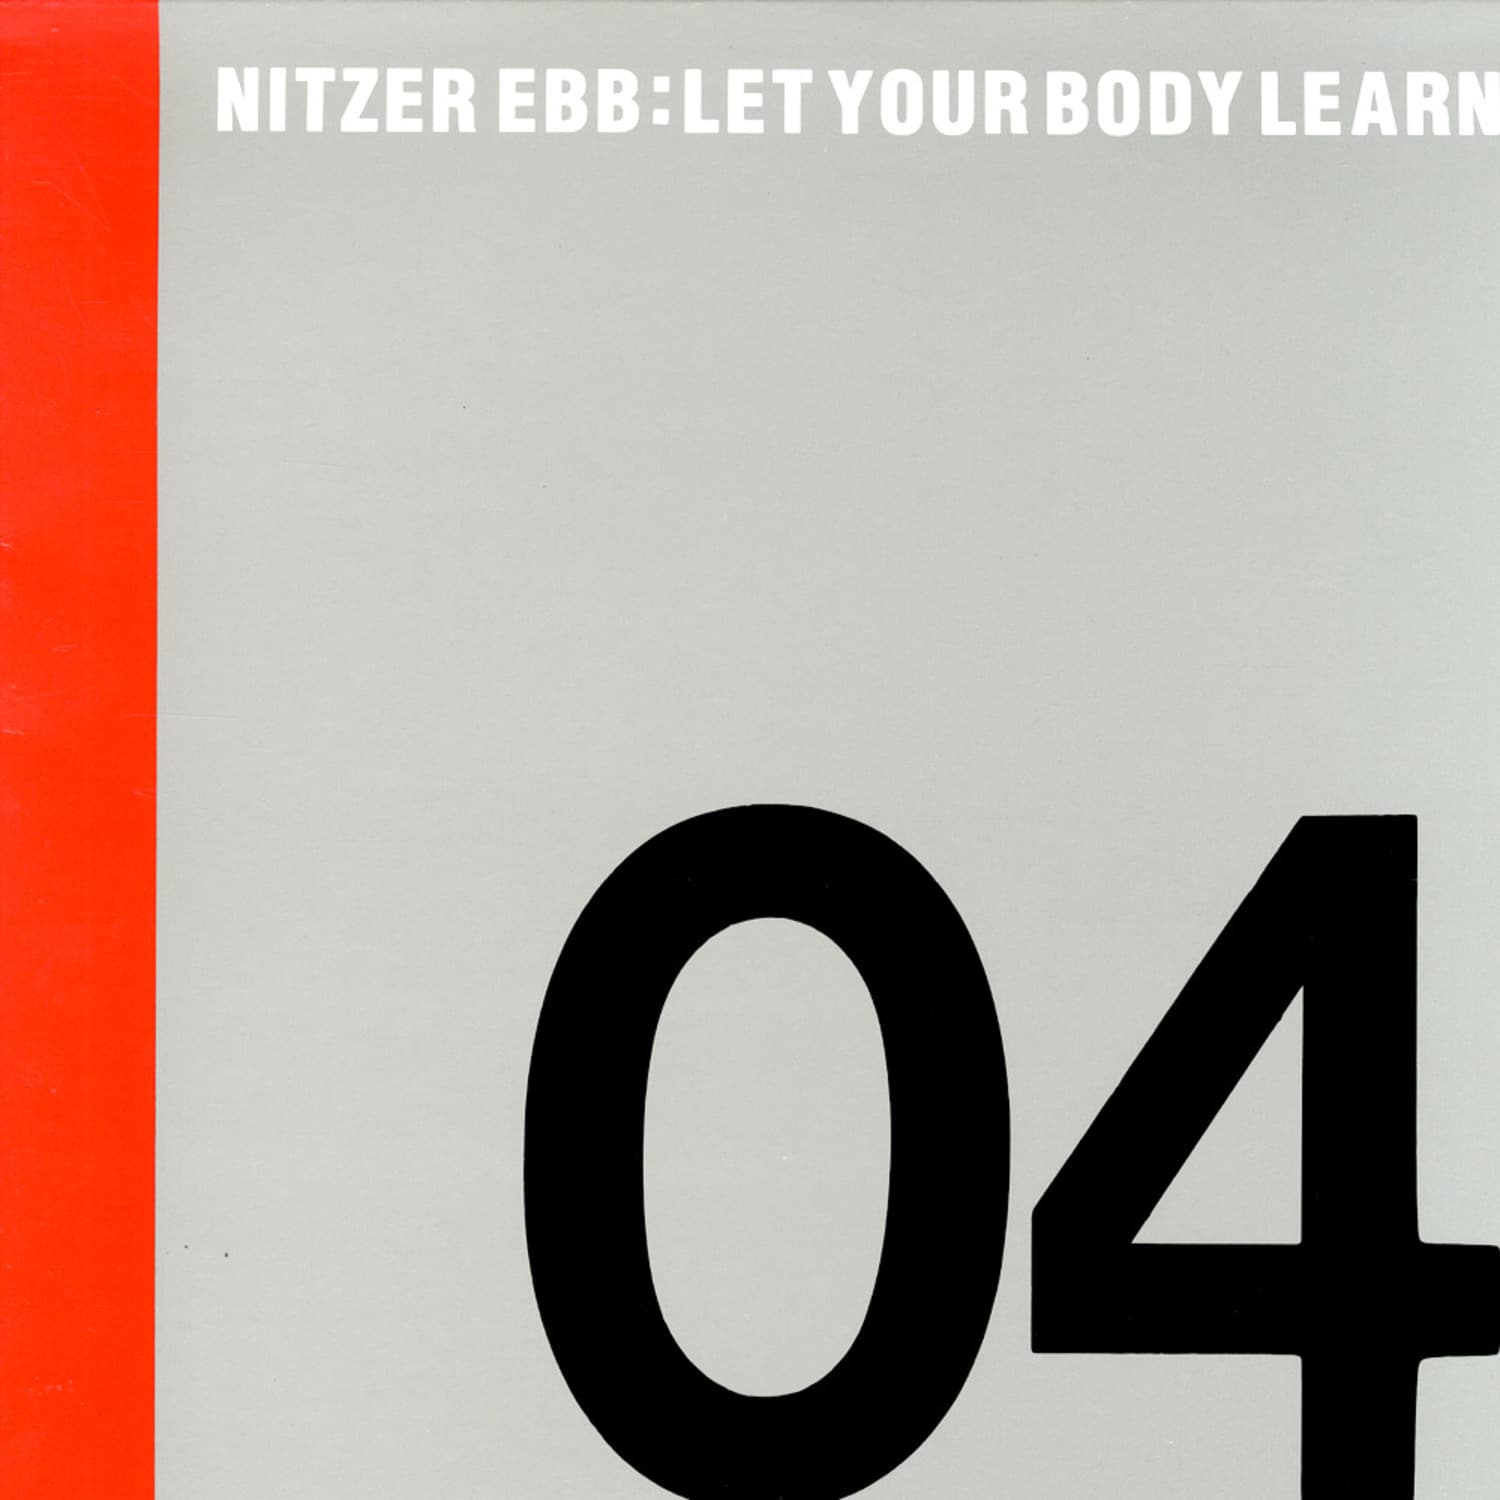 Nitzer Ebb - LET YOUR BODY LEARN